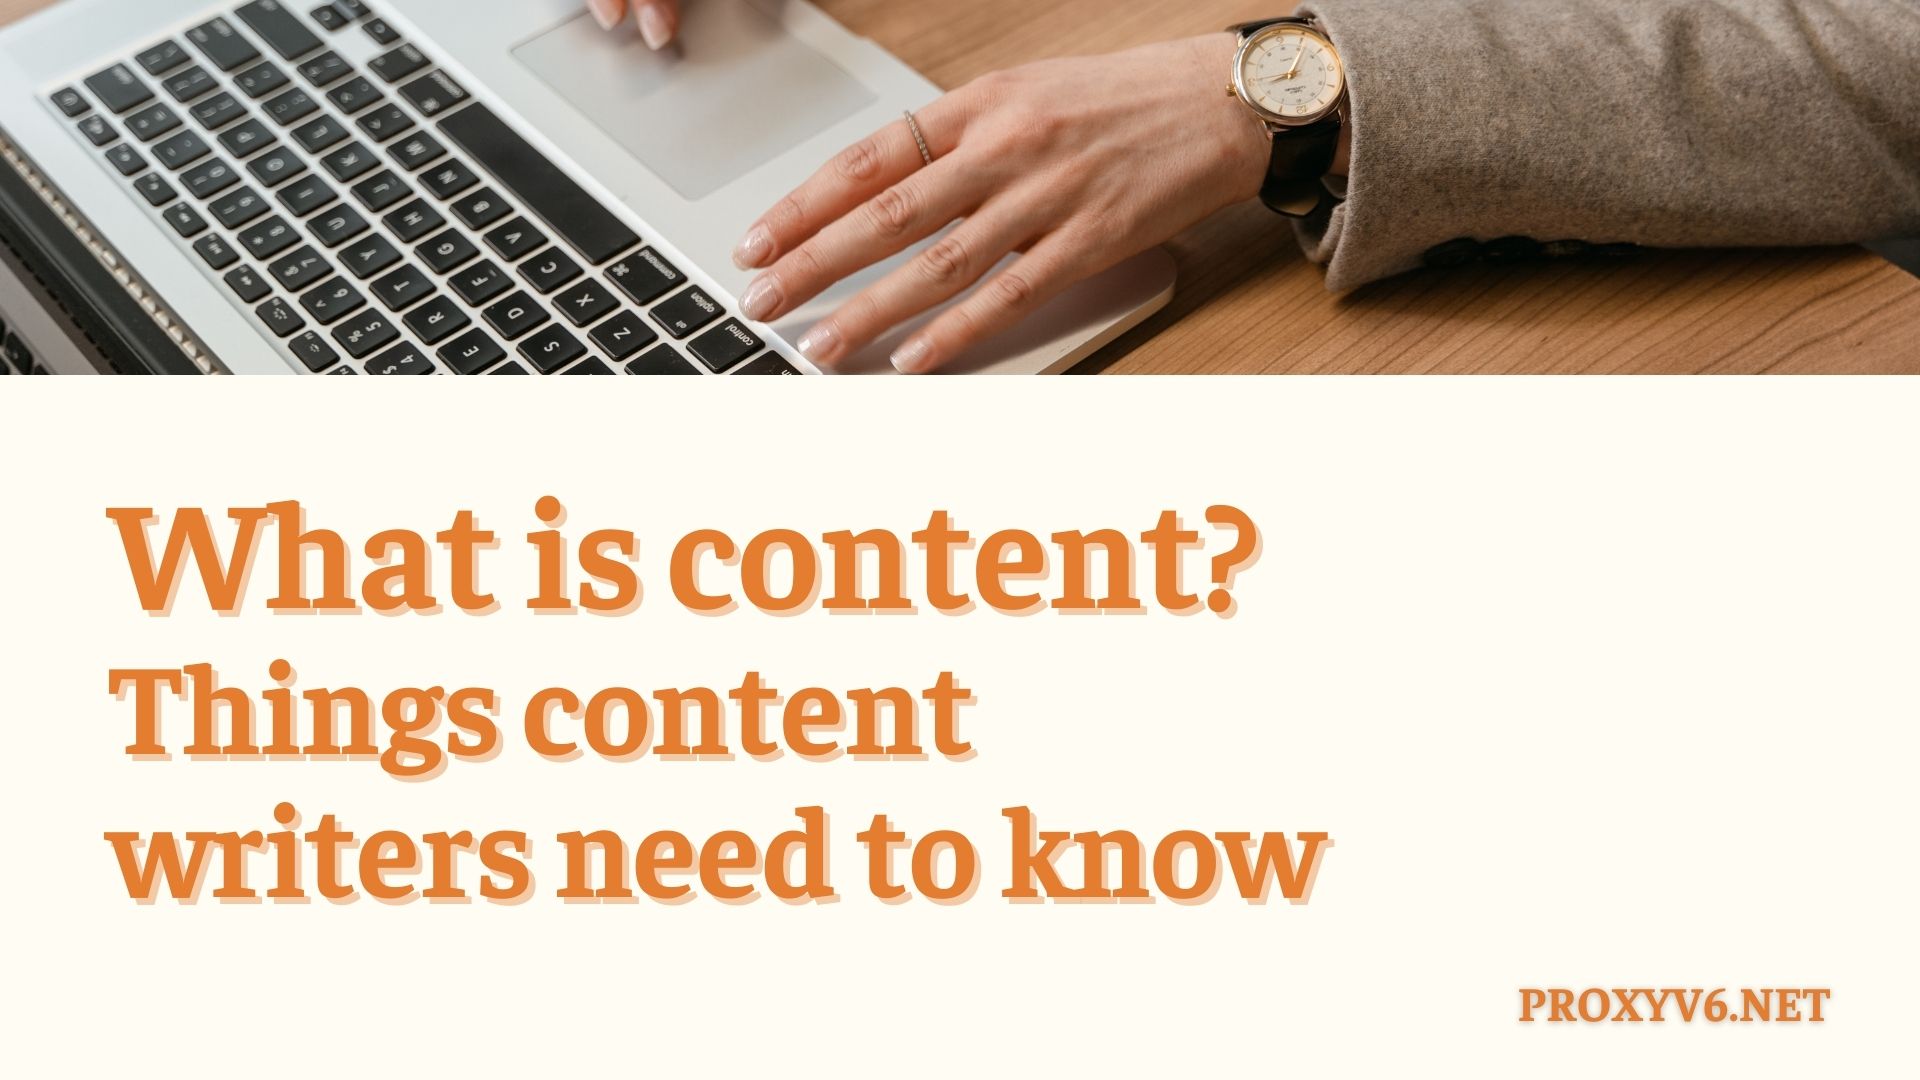 What is content? Things content writers need to know